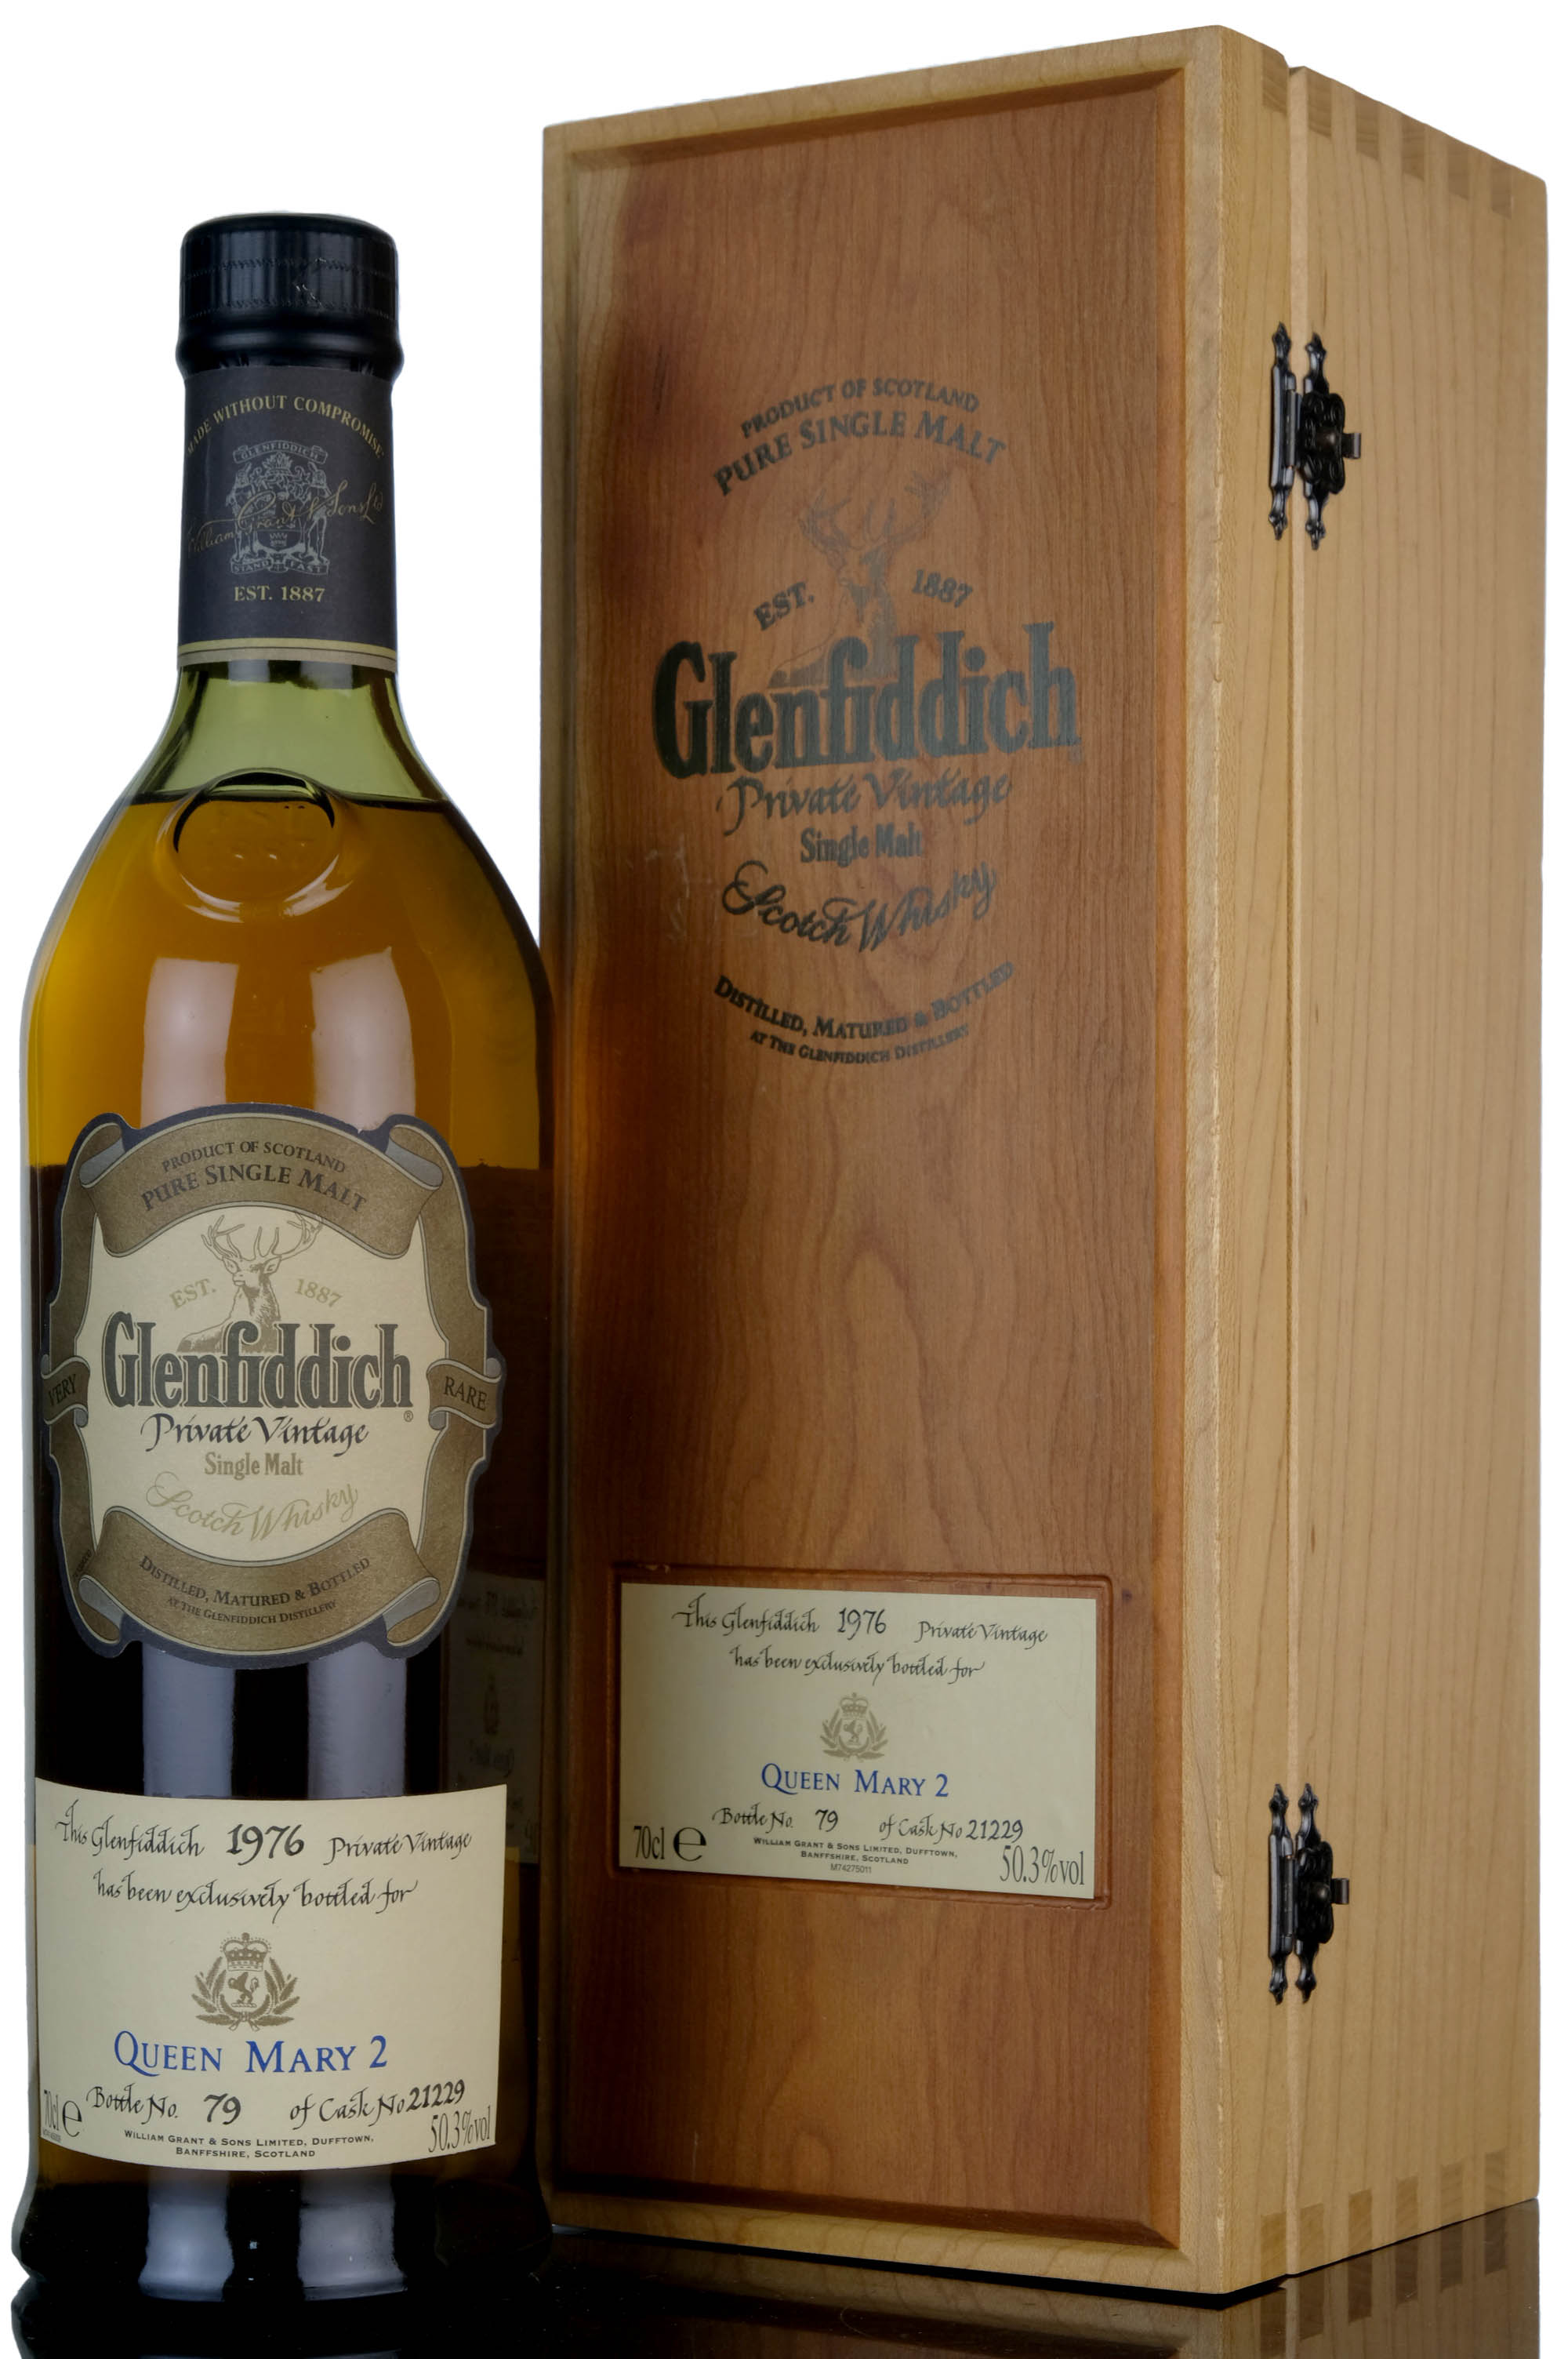 Glenfiddich 1976-2004 - Private Vintage - Single Cask 21229 - Queen Mary 2 Exclusive